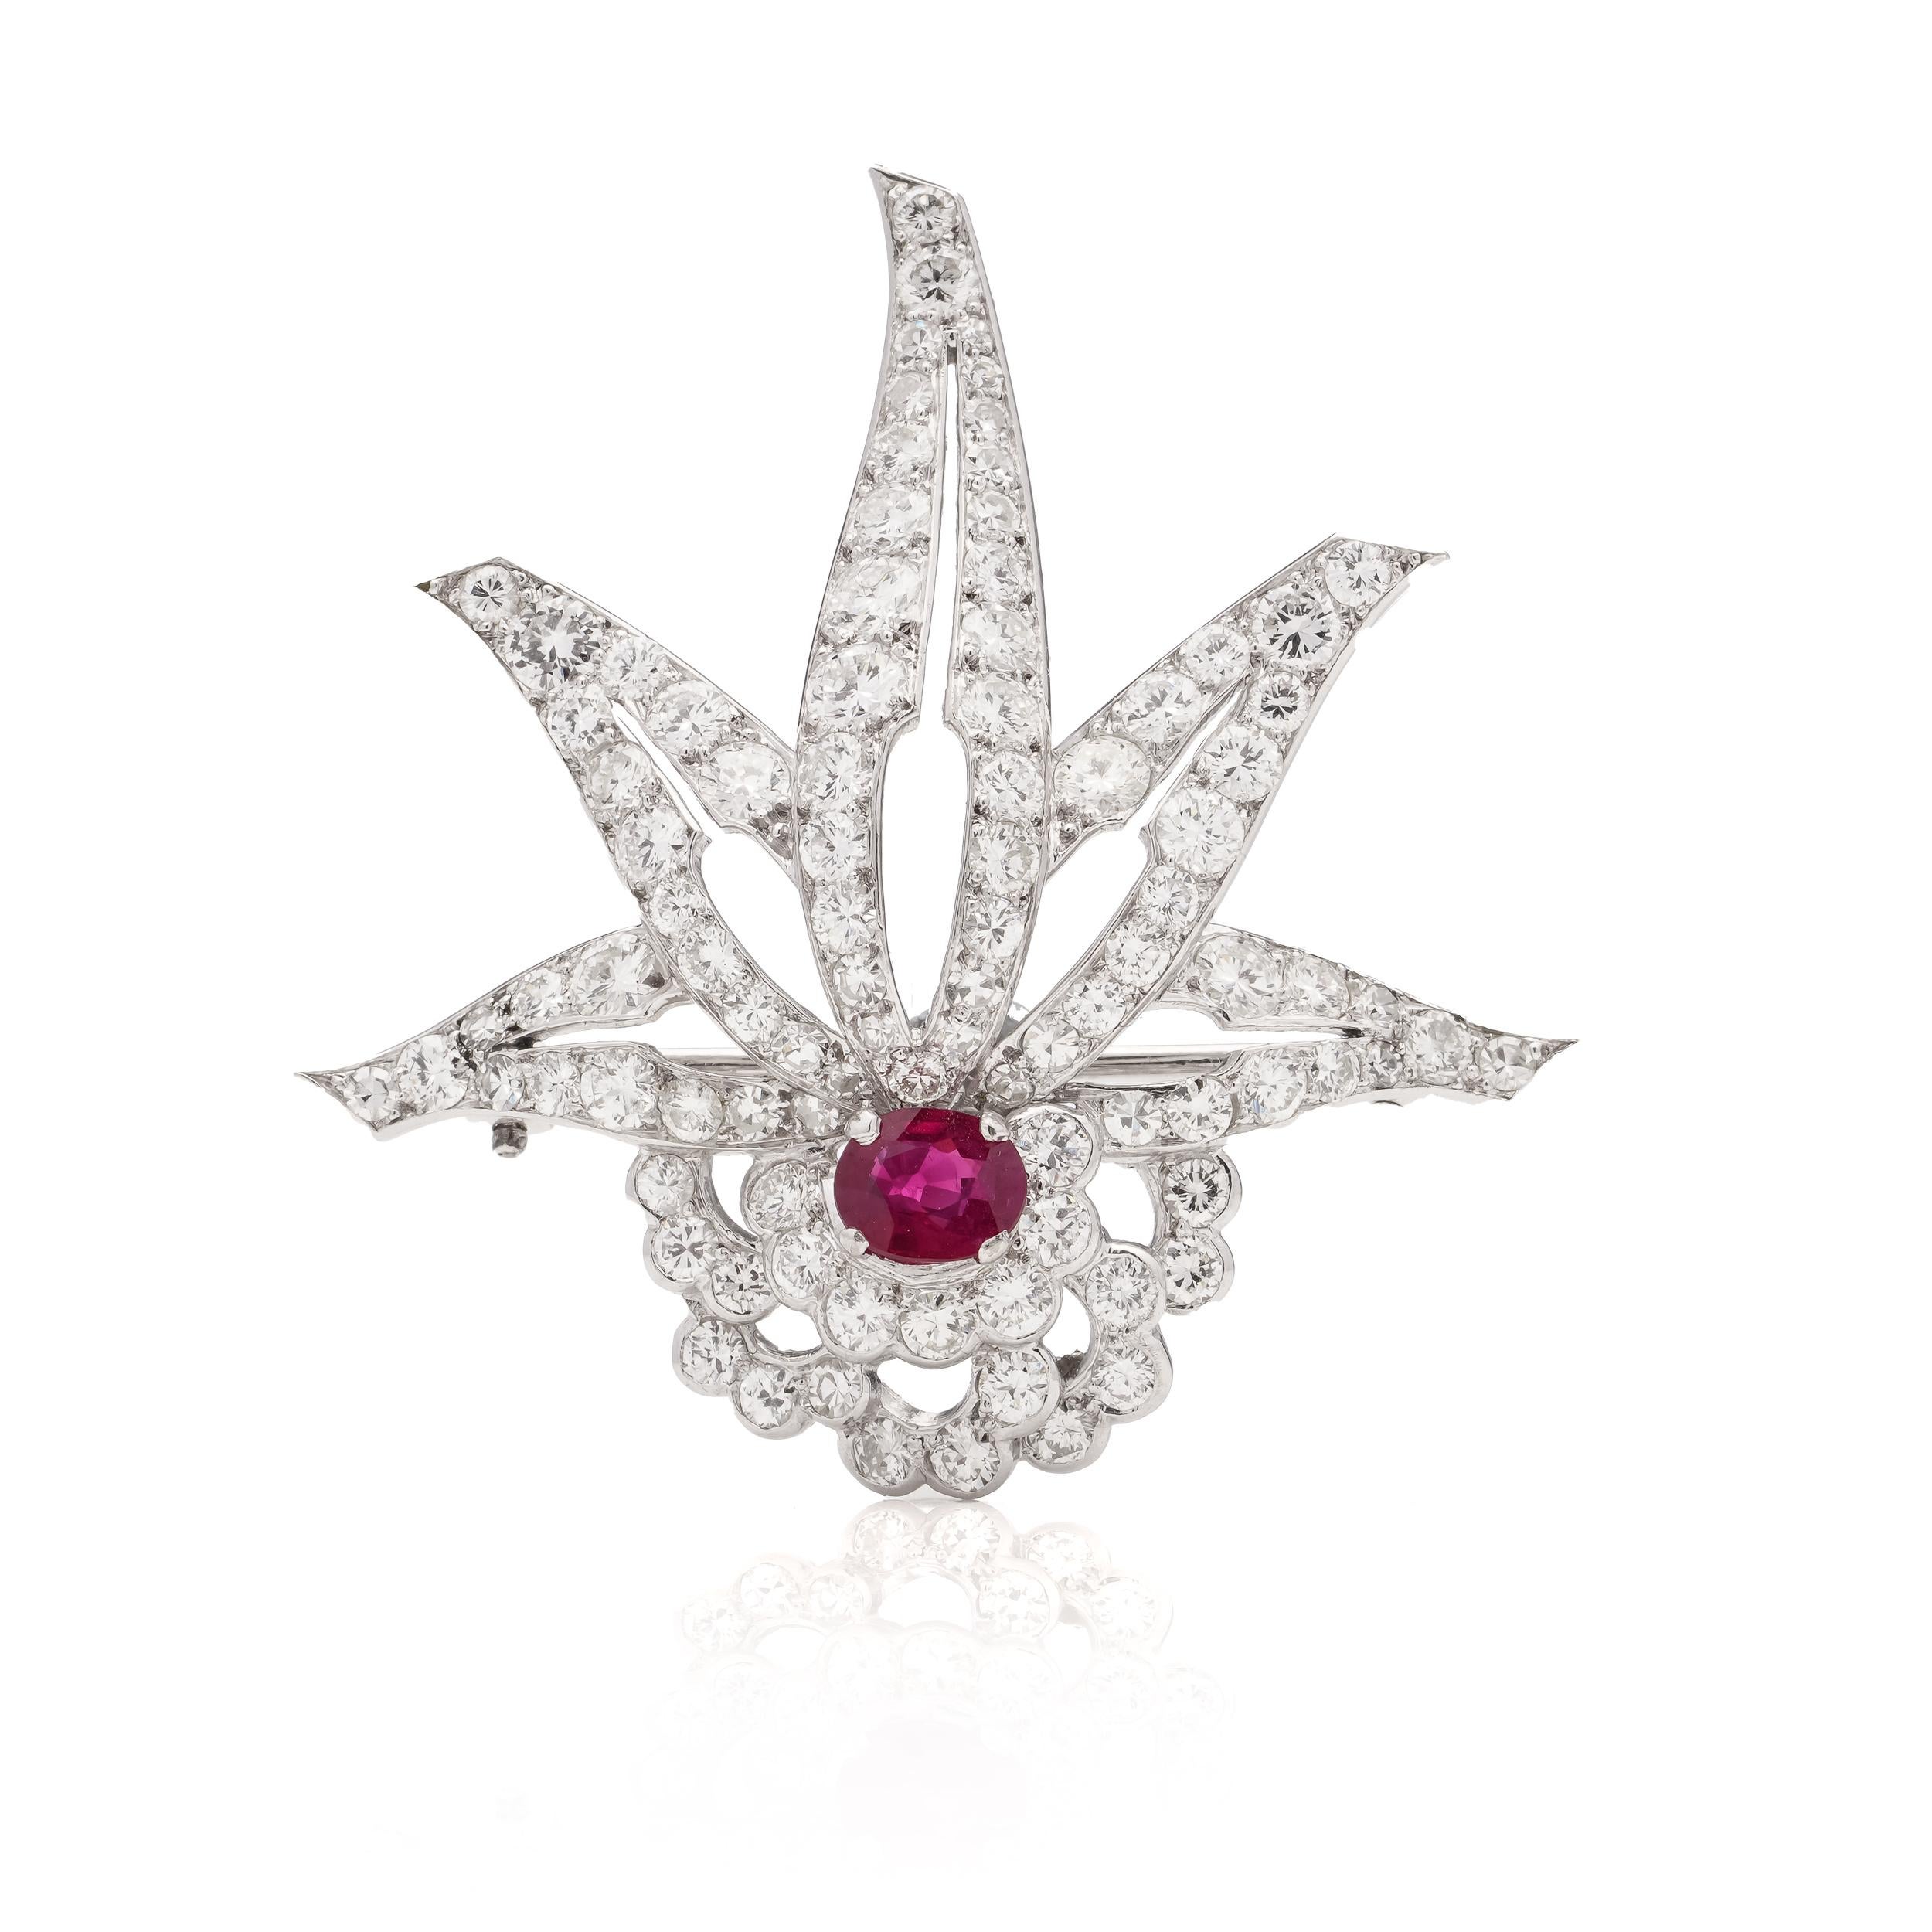  900. platinum brooch set with 4.62 carats of round brilliant diamonds and oval faceted ruby. 

X-Ray has tested positive for 900. Platinum. 
Dimensions:
4.5 x 4.2 x 1.2 cm 
Weight: 9.53 grams

Diamonds - 
Cut: Brilliant 
Approx. Quantity of stones: